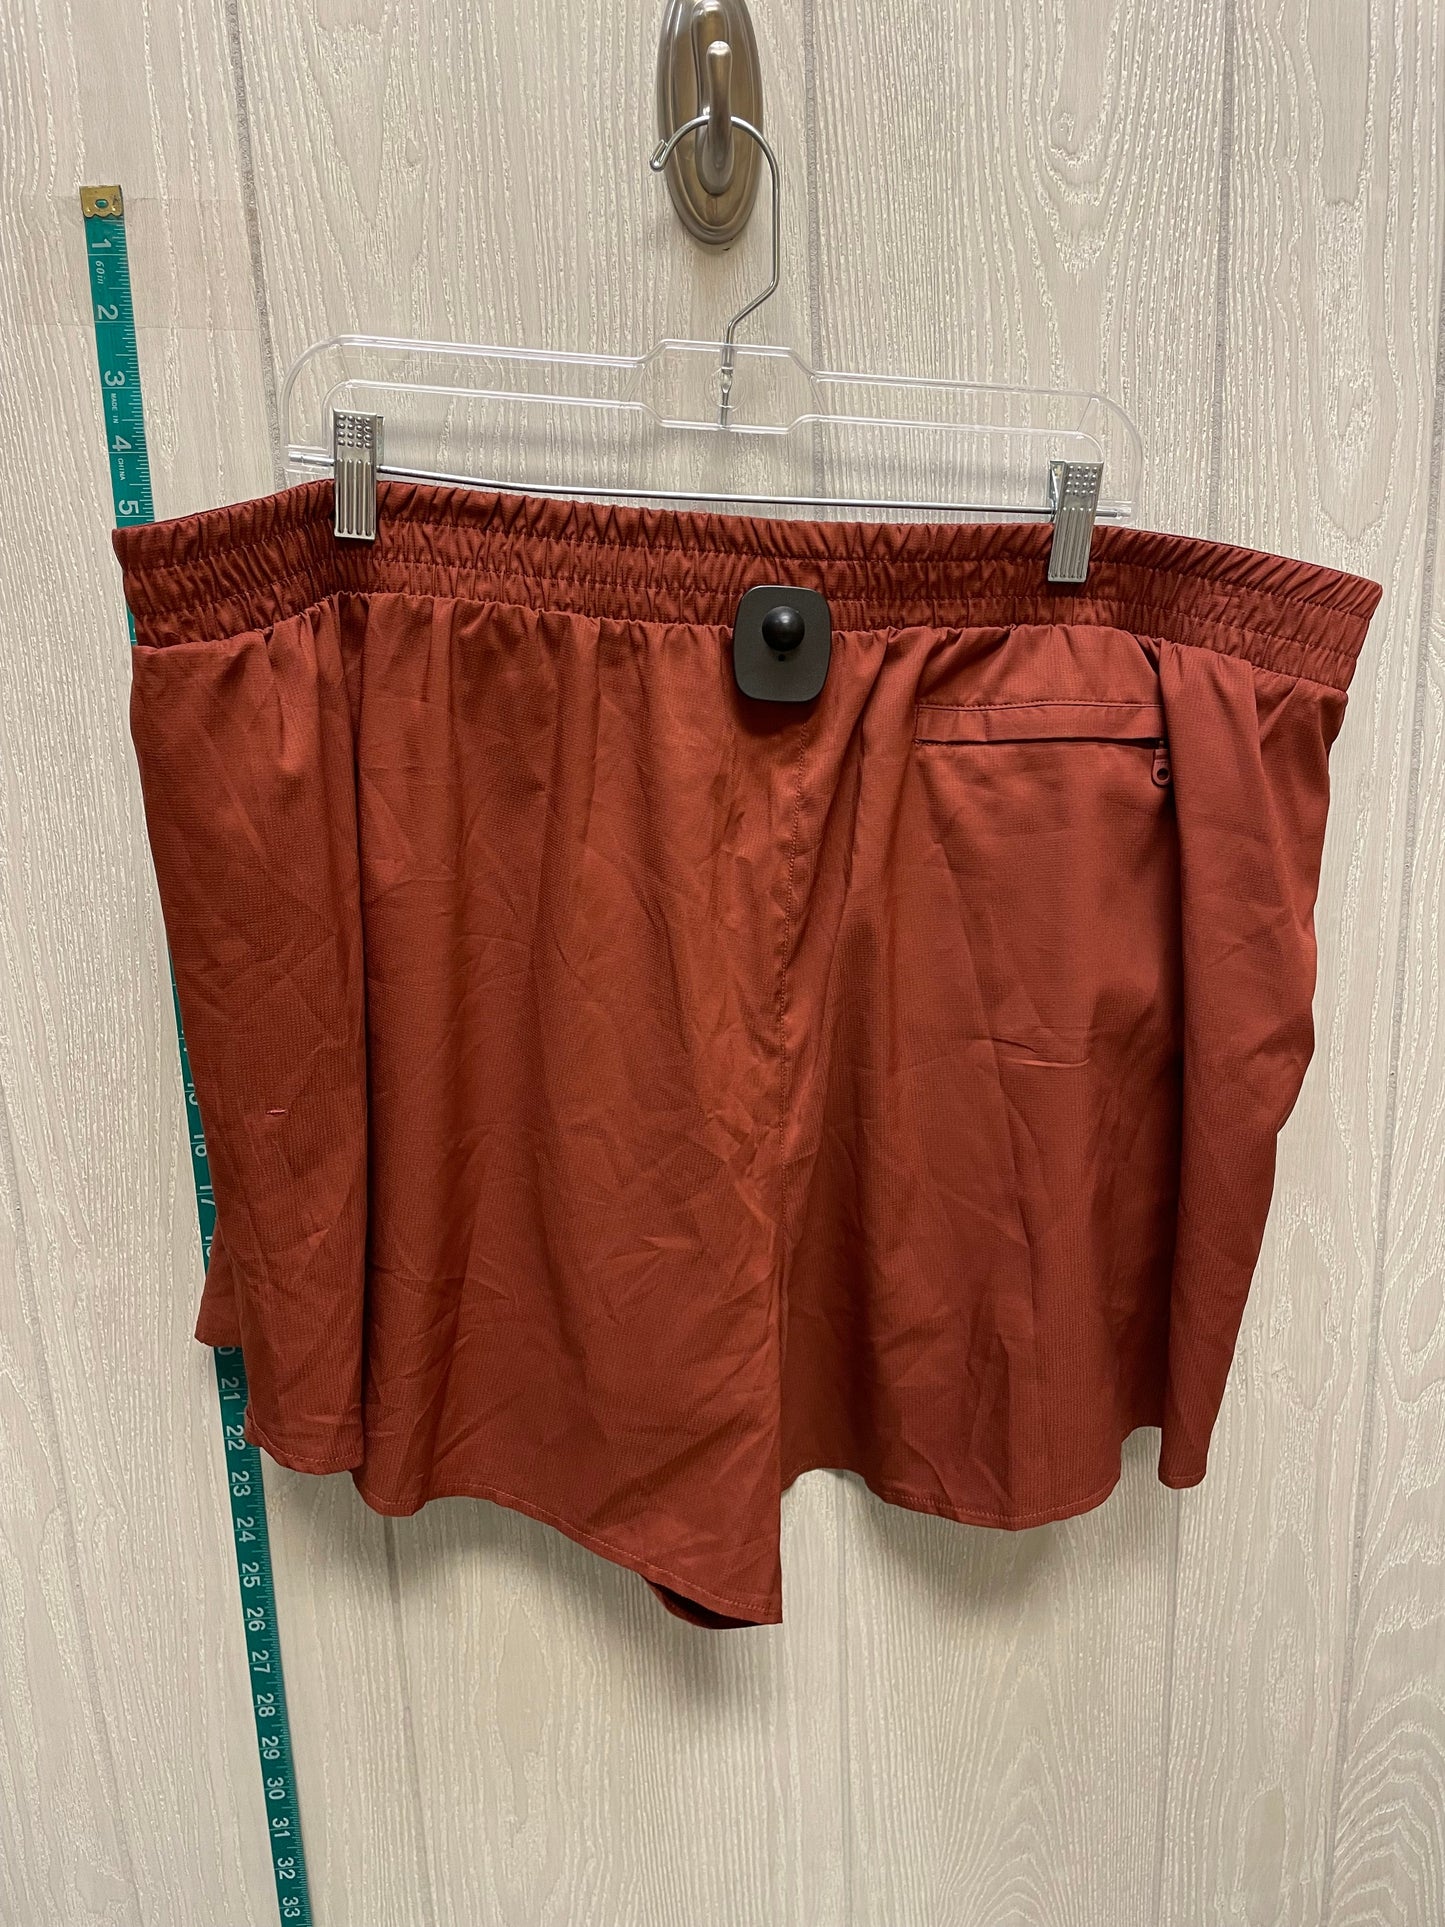 Athletic Shorts By Cmc  Size: 18